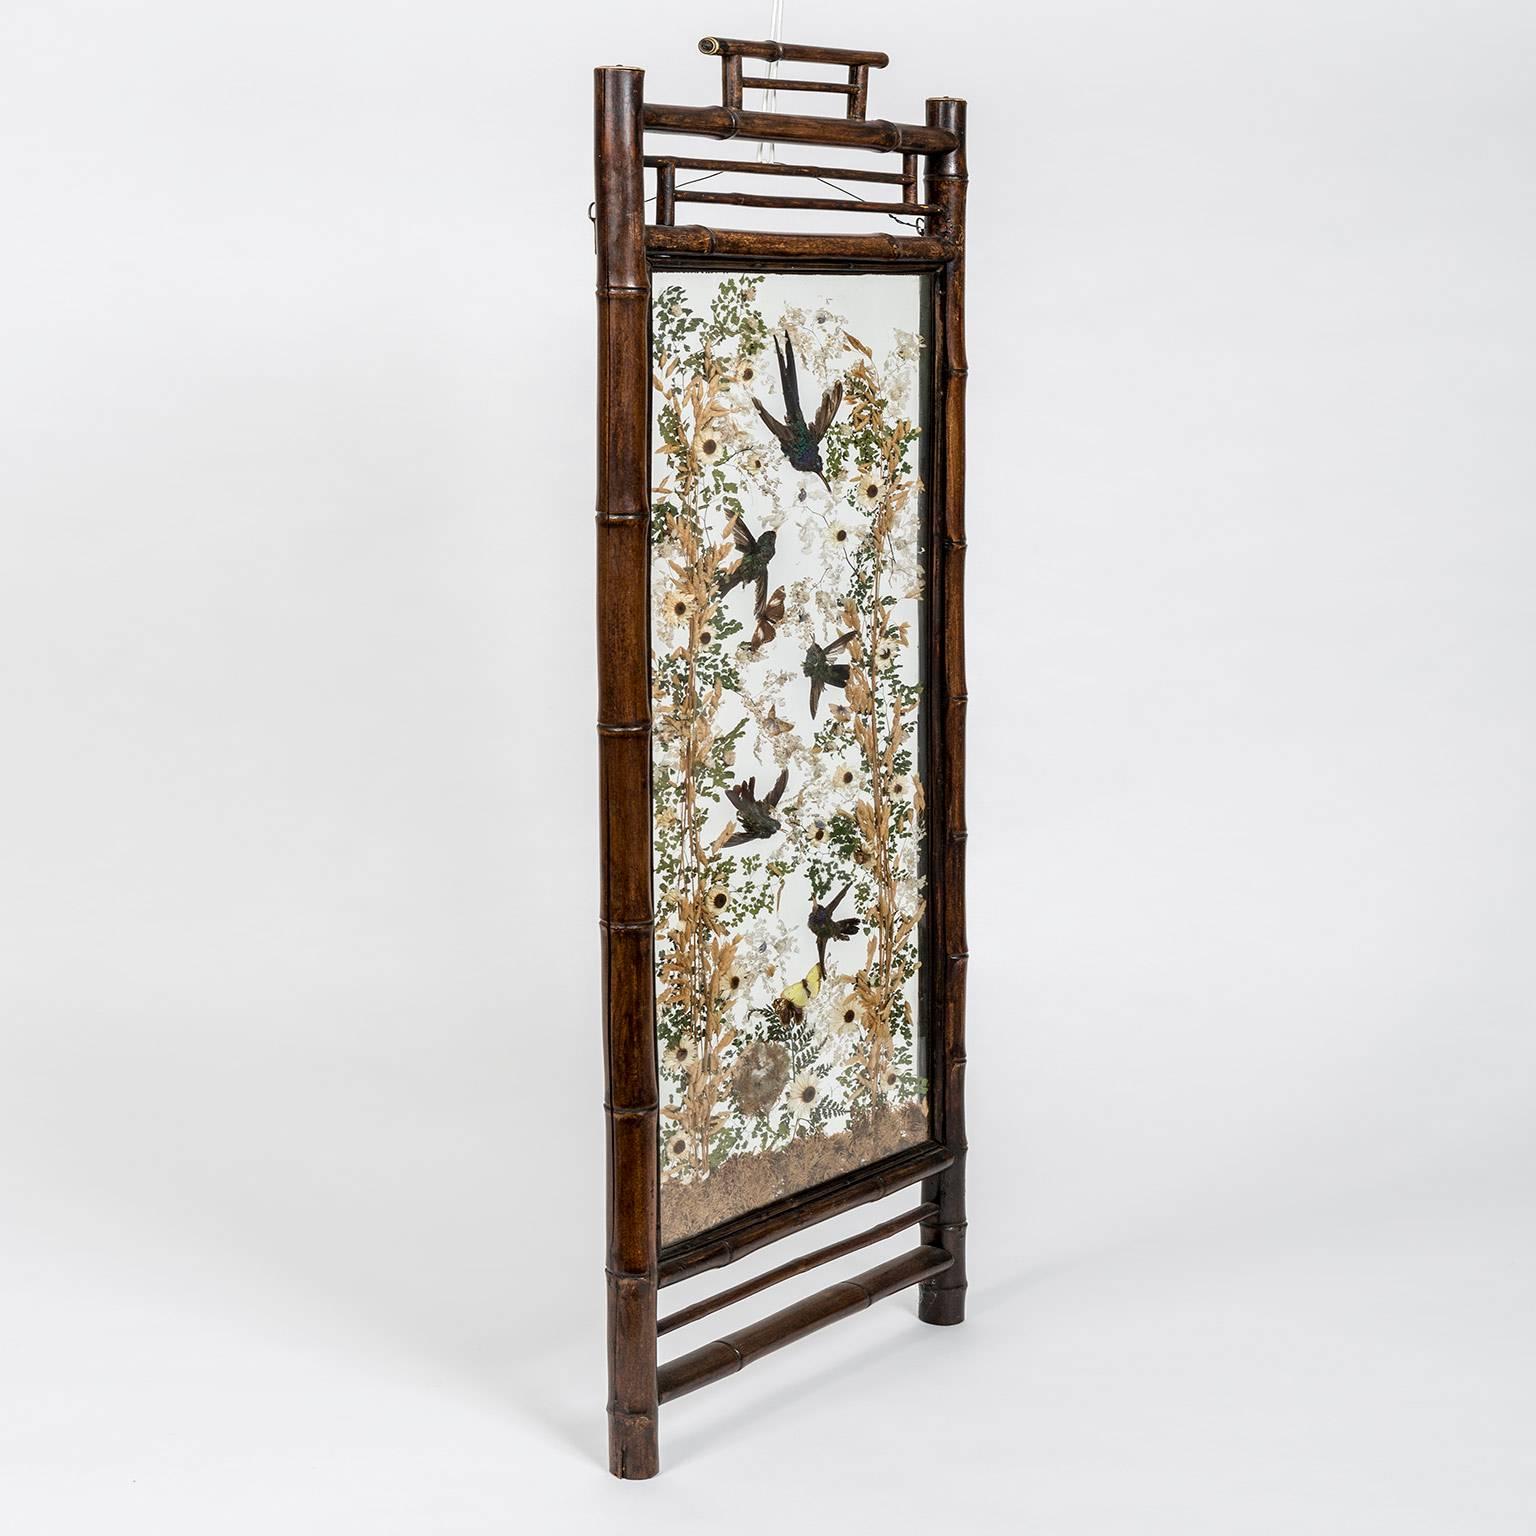 A pair of 19th century hummingbird taxidermy screens, in bamboo Japanese- style frames probably dating from the last quarter of the 19th century when the aesthetic influence of Japan was very much in vogue. They were created by the renowned London